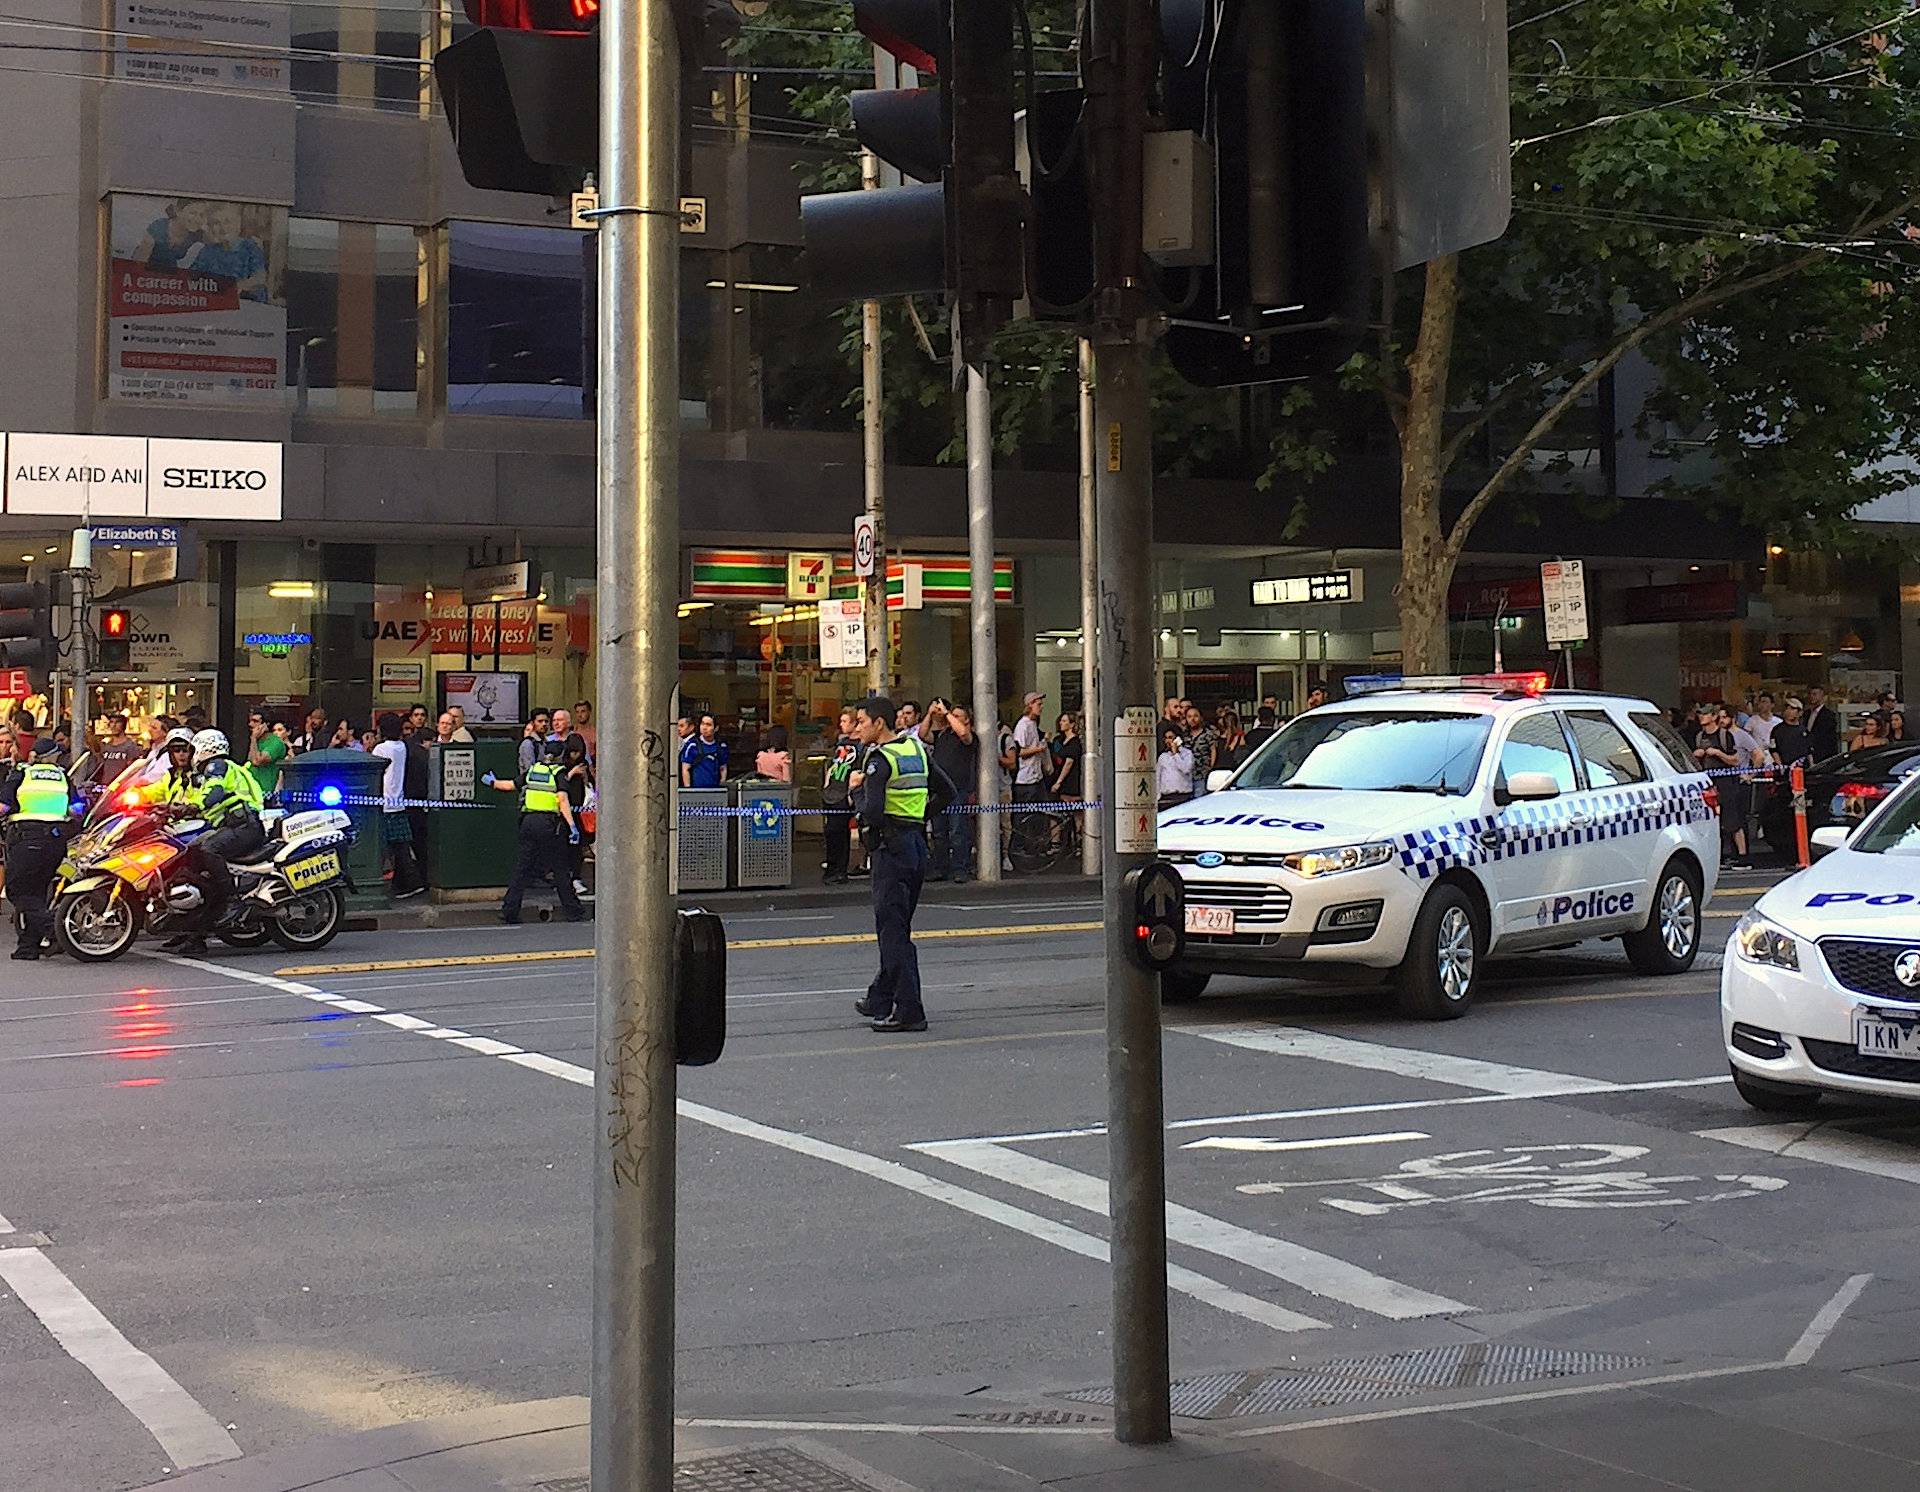 Police officers secure the area as members of the public stand behind police tape after the arrest of the driver of a vehicle that ploughed into pedestrians at a crowded intersection near the Flinders Street train station in central Melbourne